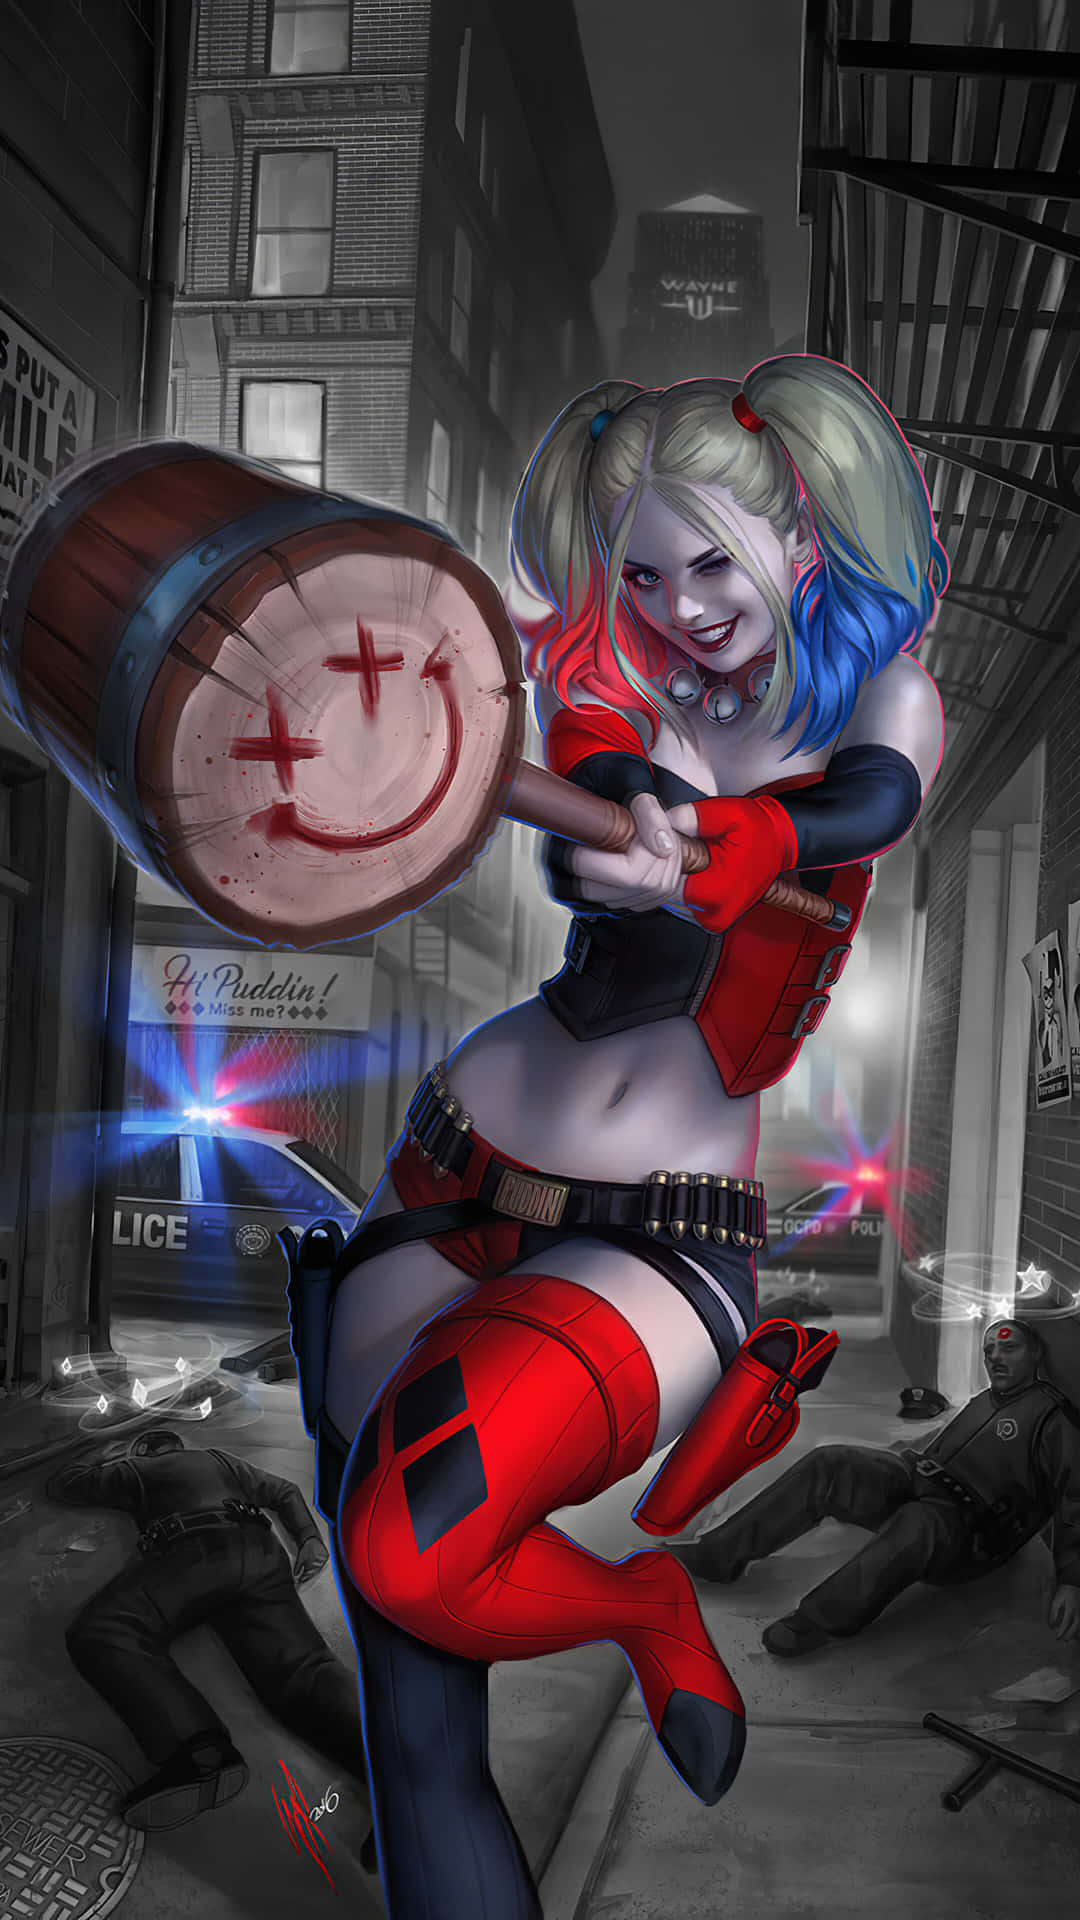 Harley Quinn swinging her iconic hammer with style and a wicked smile. Wallpaper